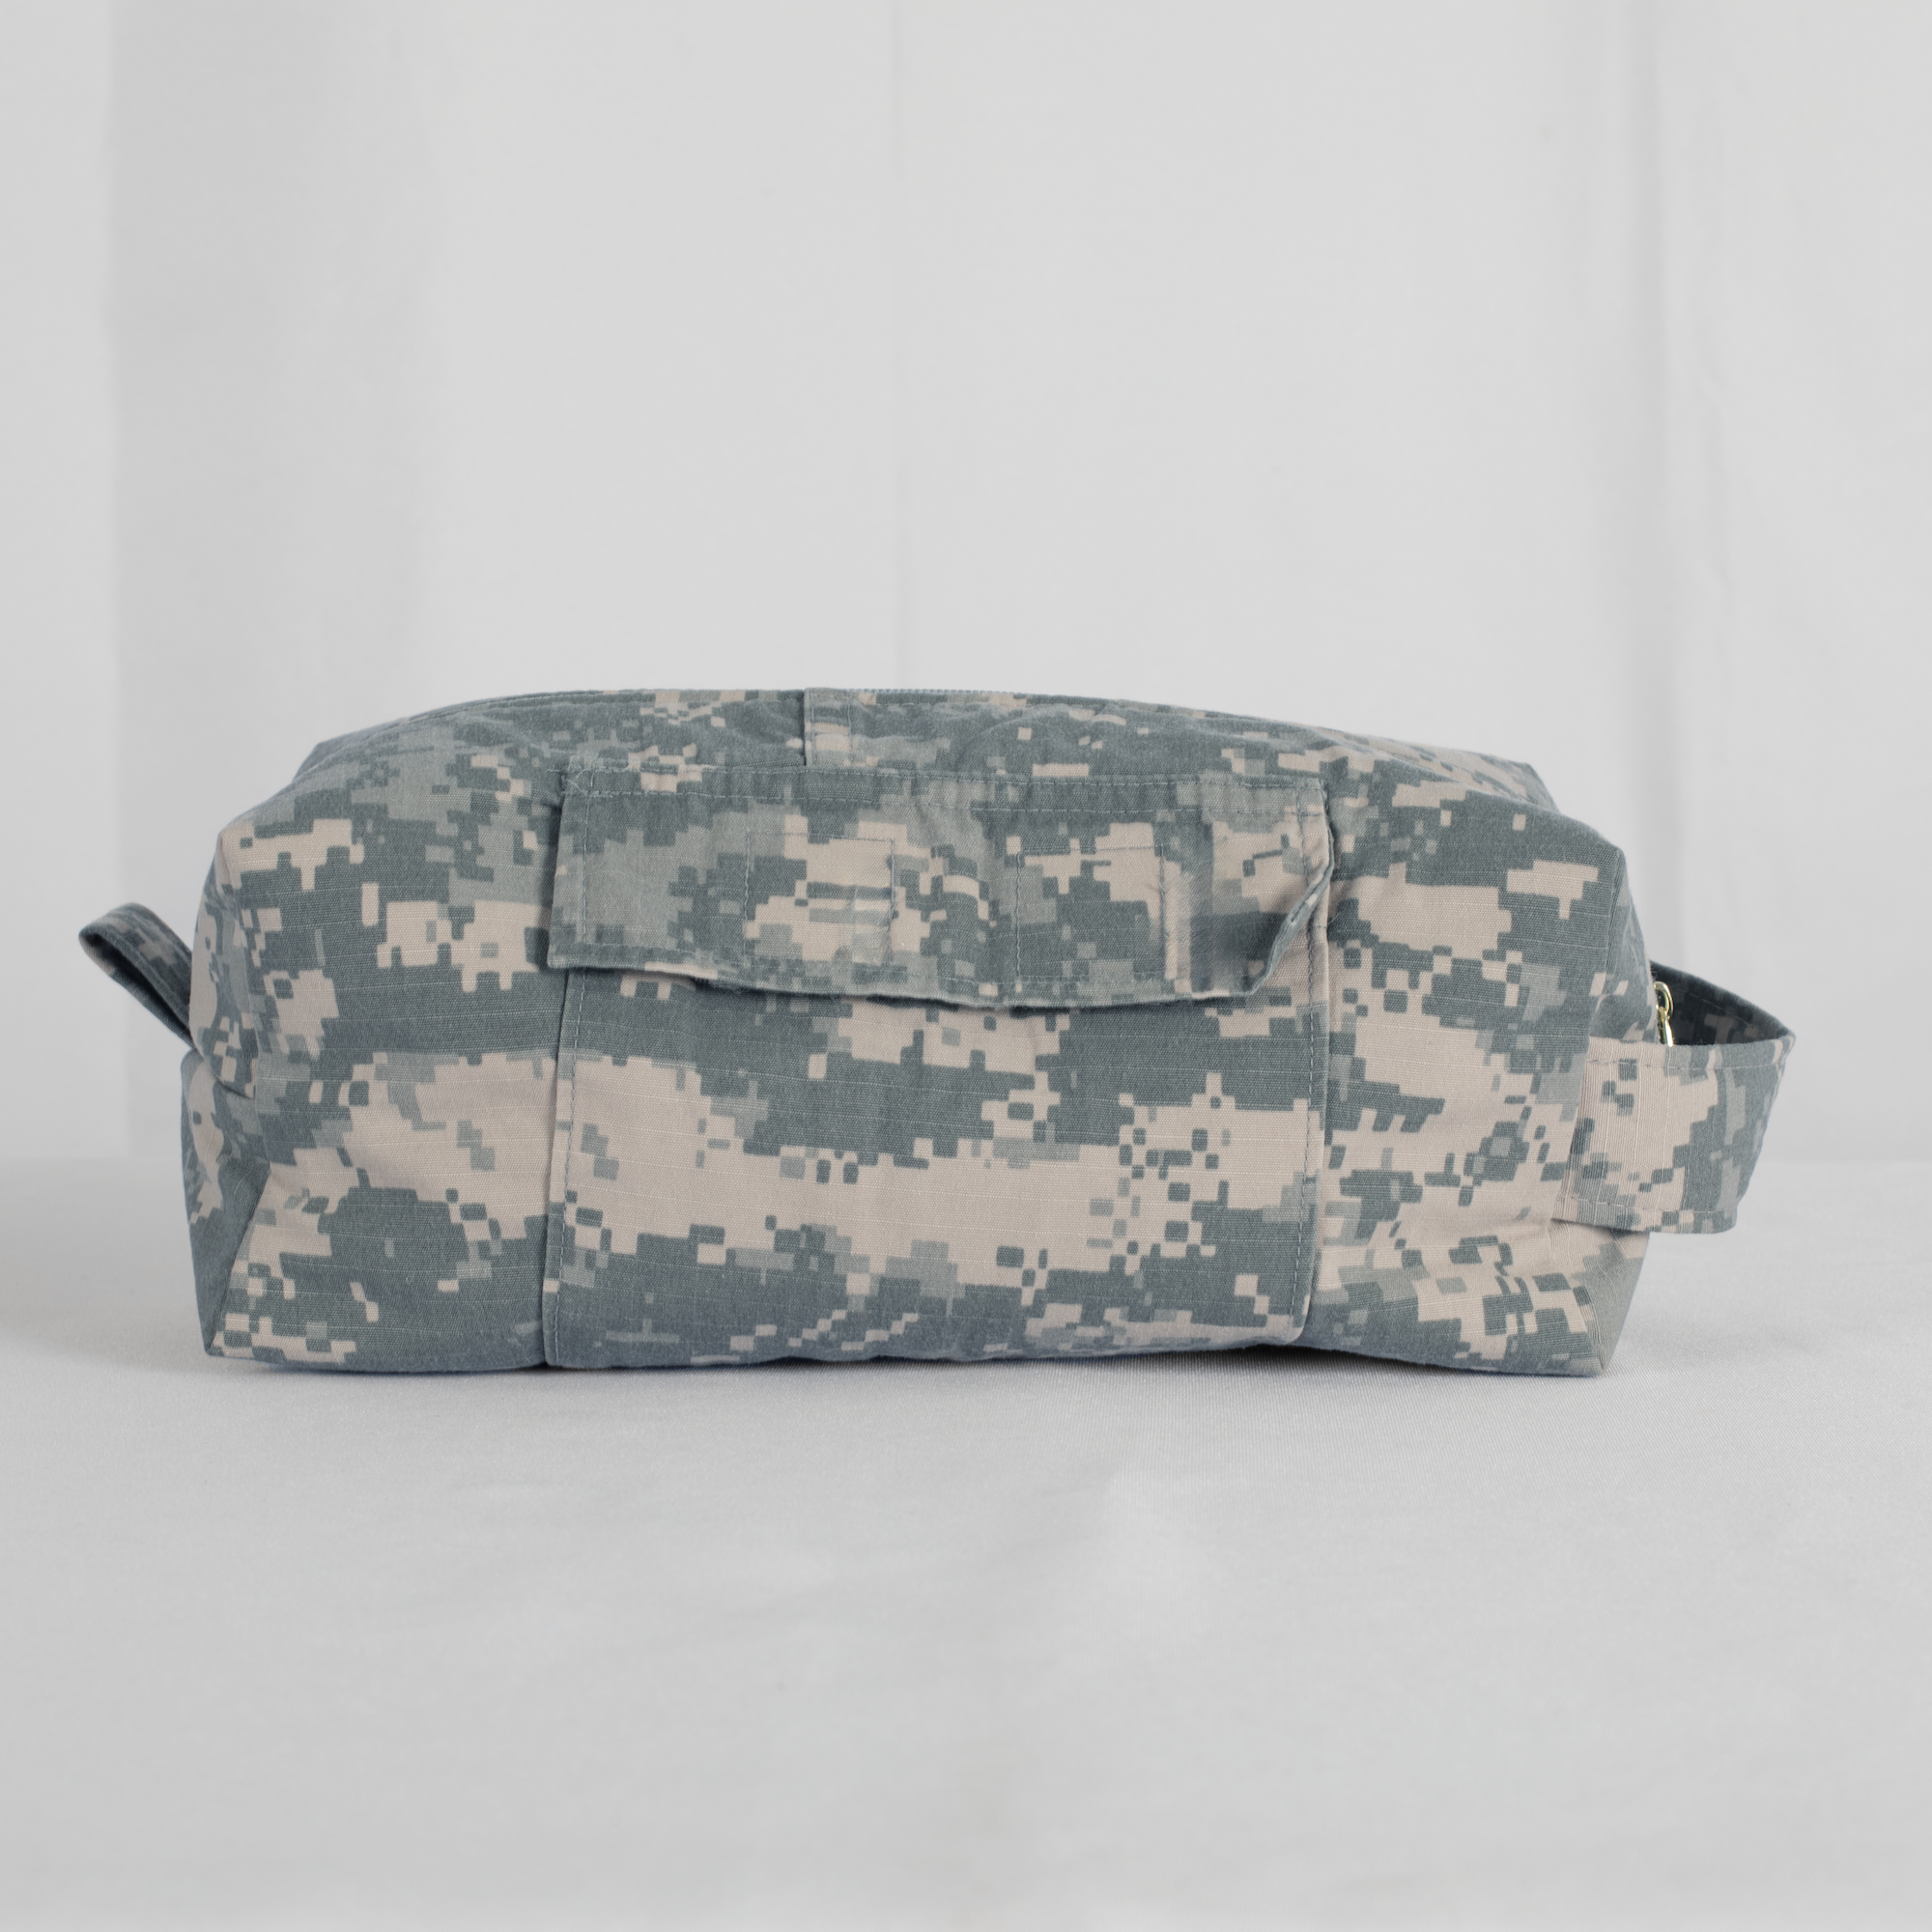 back view of U.S Army Toiletry